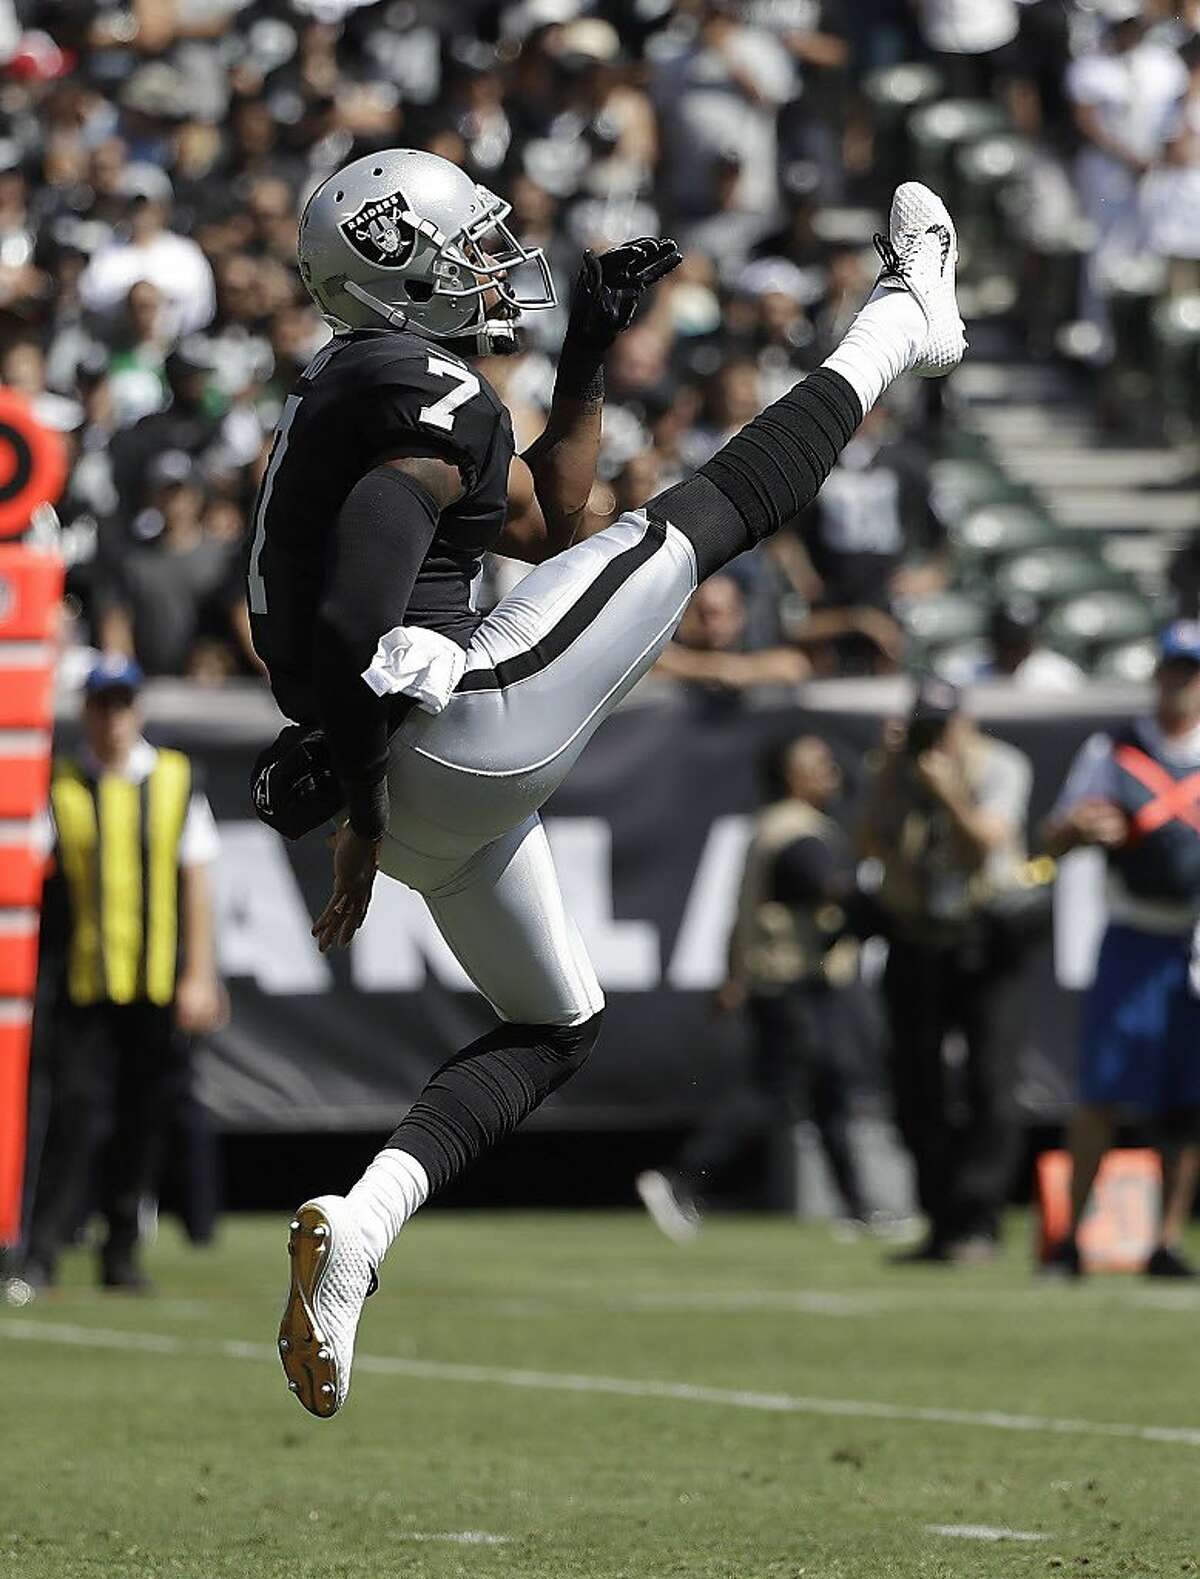 Raiders punter takes his quirky act to altitude of Denver